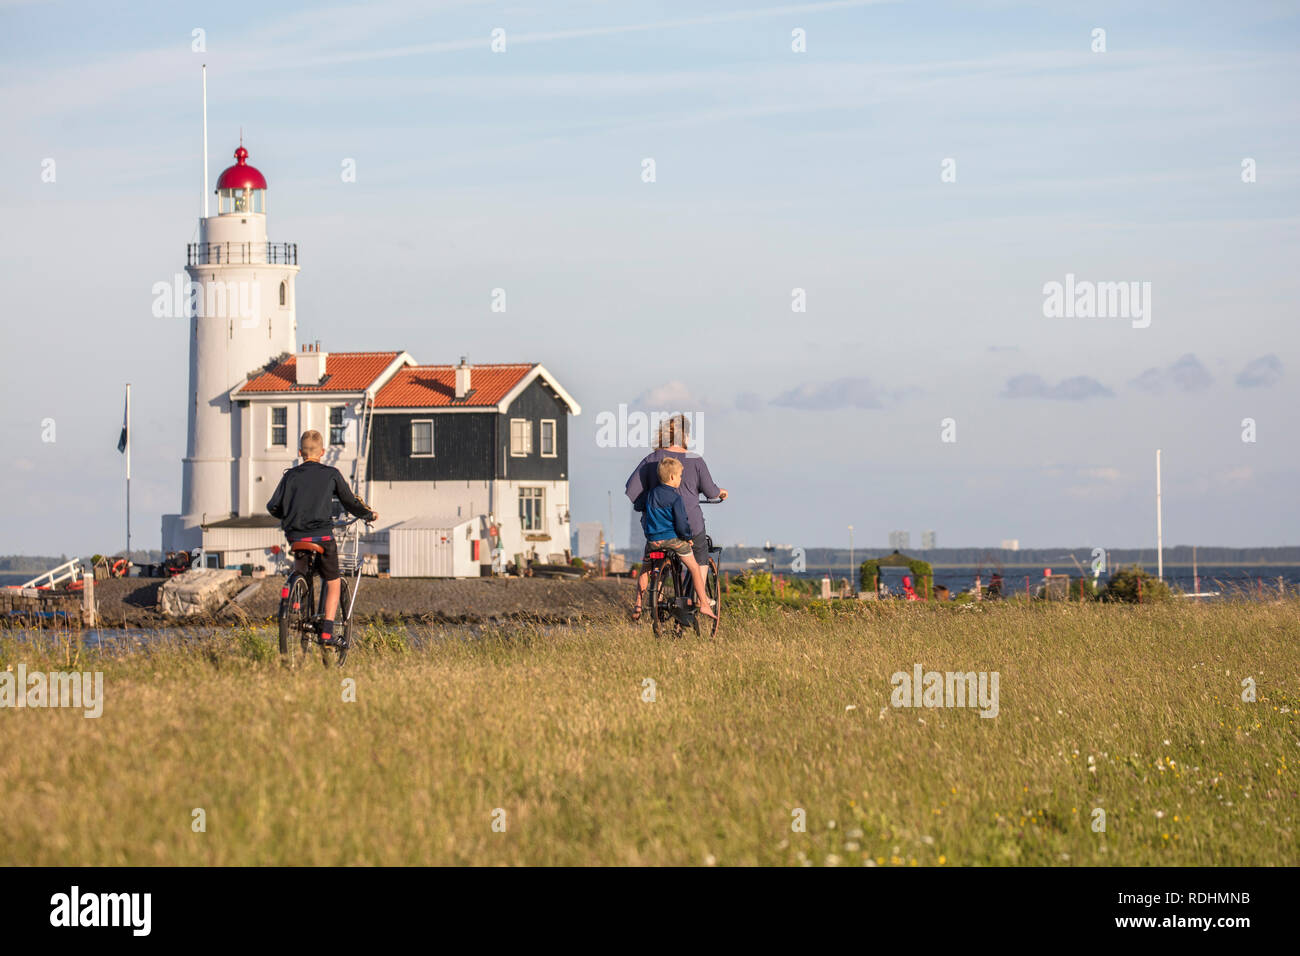 The Netherlands, Marken, Lighthouse, called Het Paard. Mother and children cycling on dyke. Stock Photo